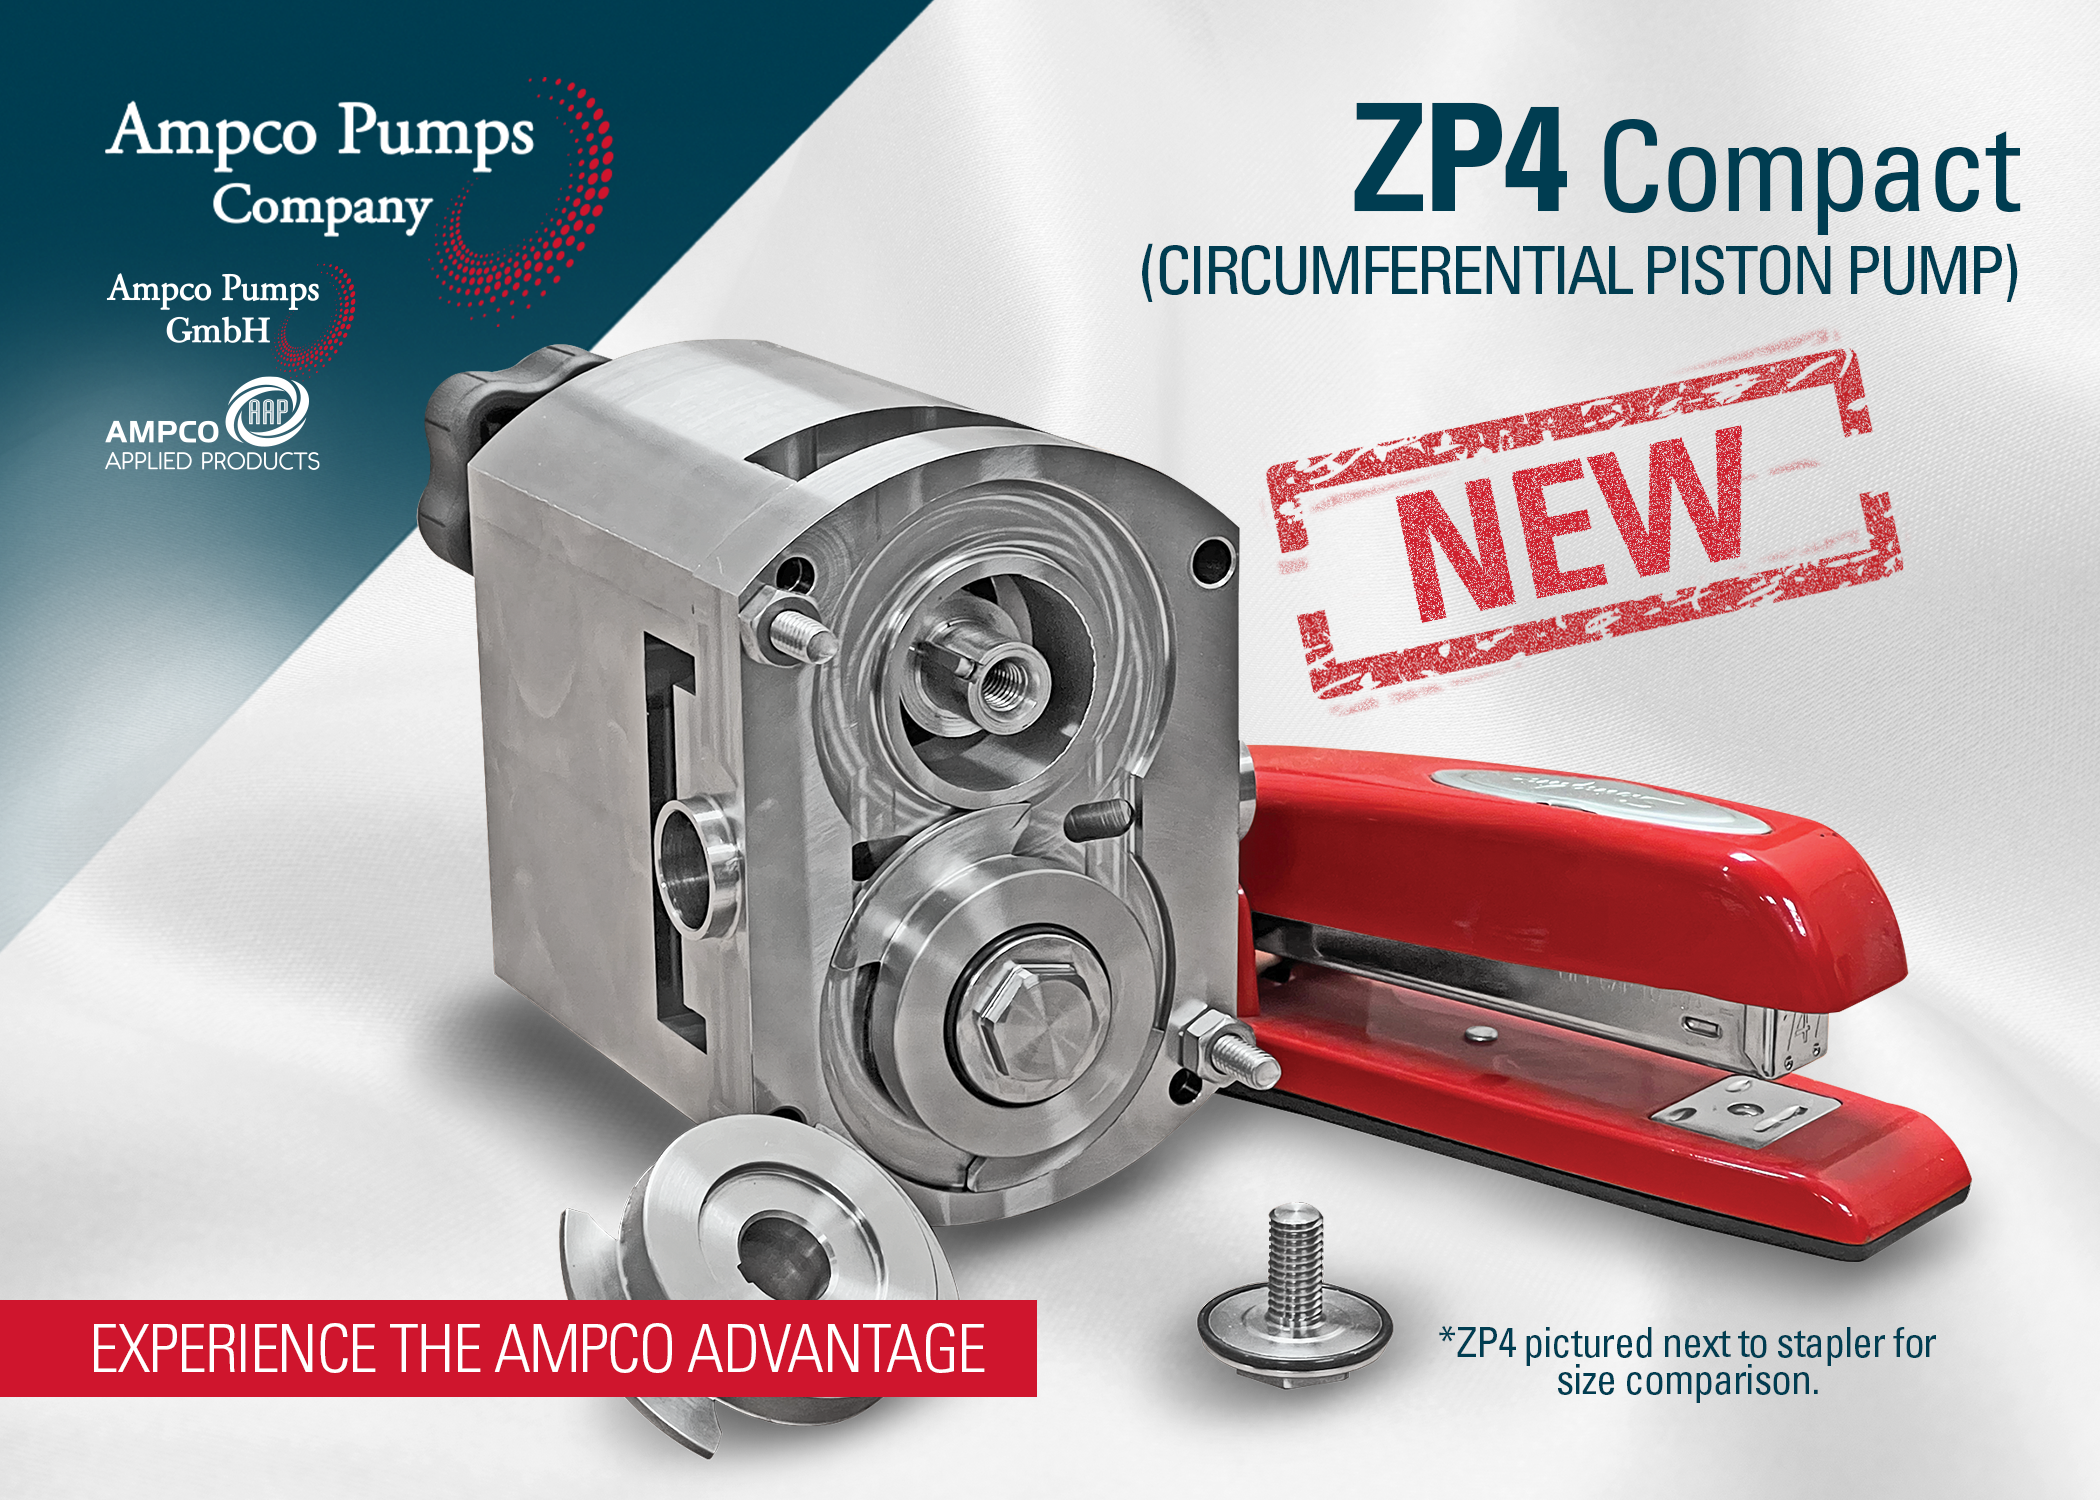 Experience the Ampco Advantage with the ZP4 compact circumferential piston pump 